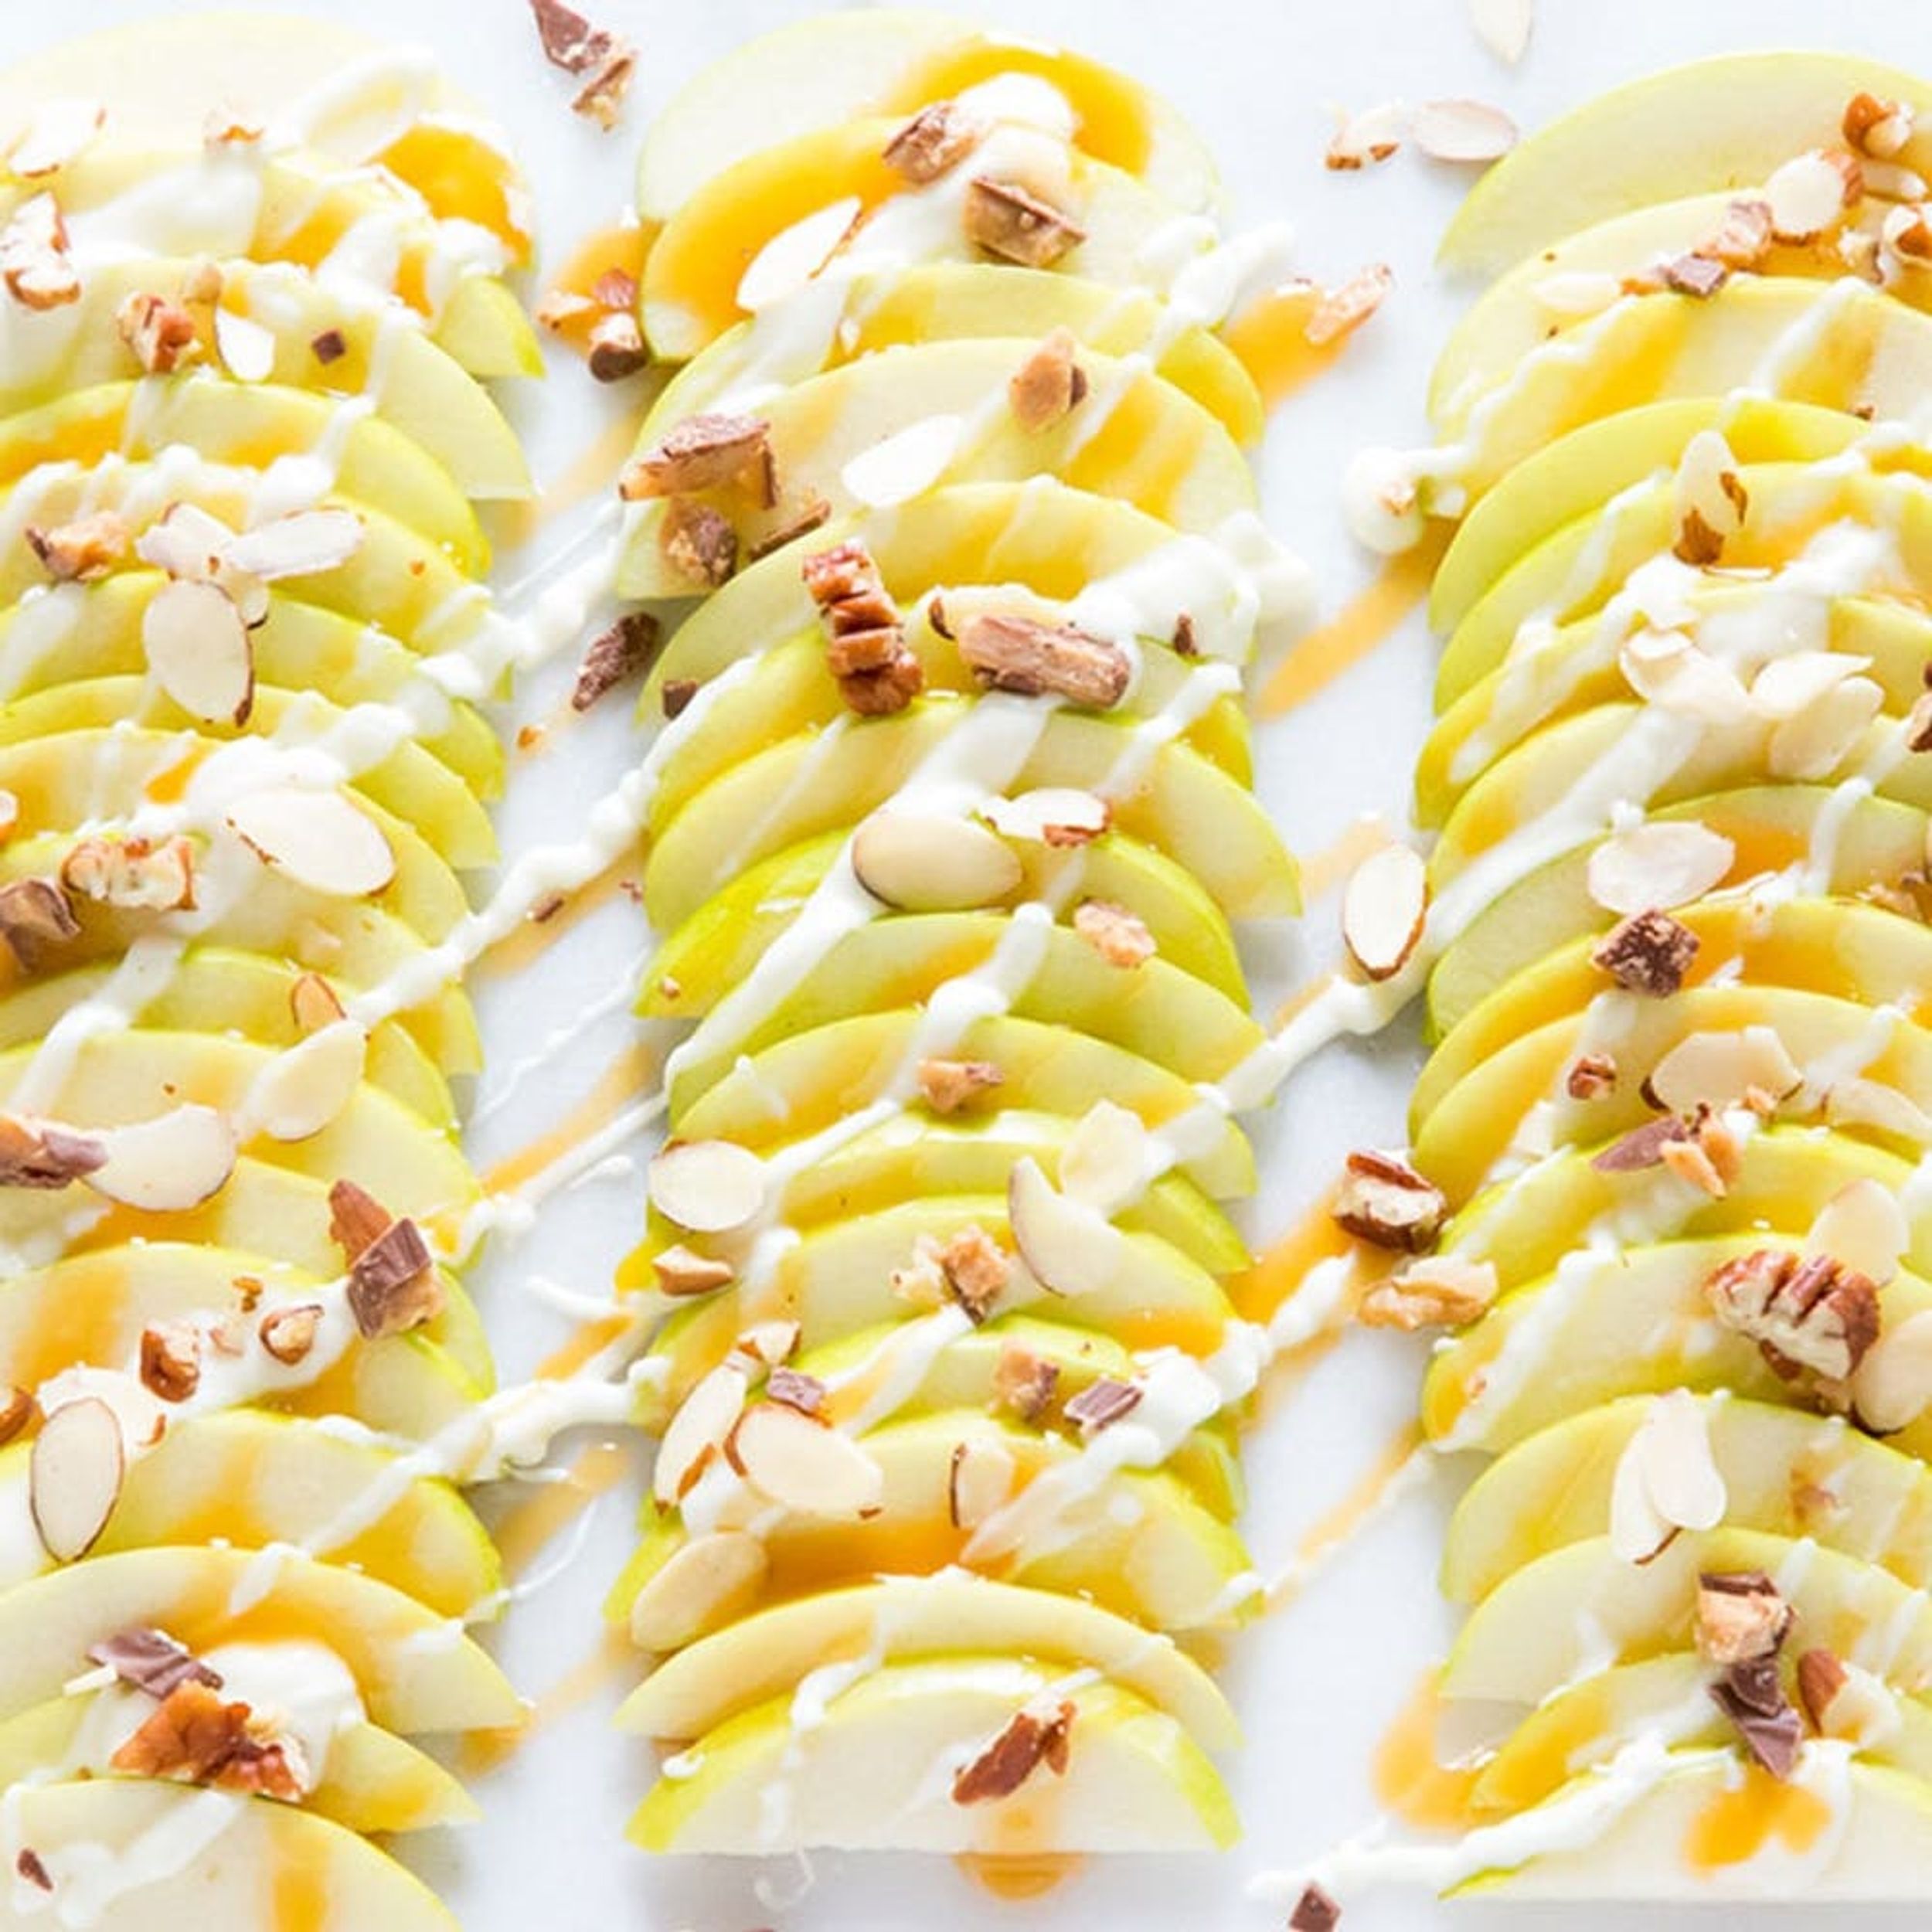 Grab Some Friends and Make These Caramel Candy-Apple Nachos!